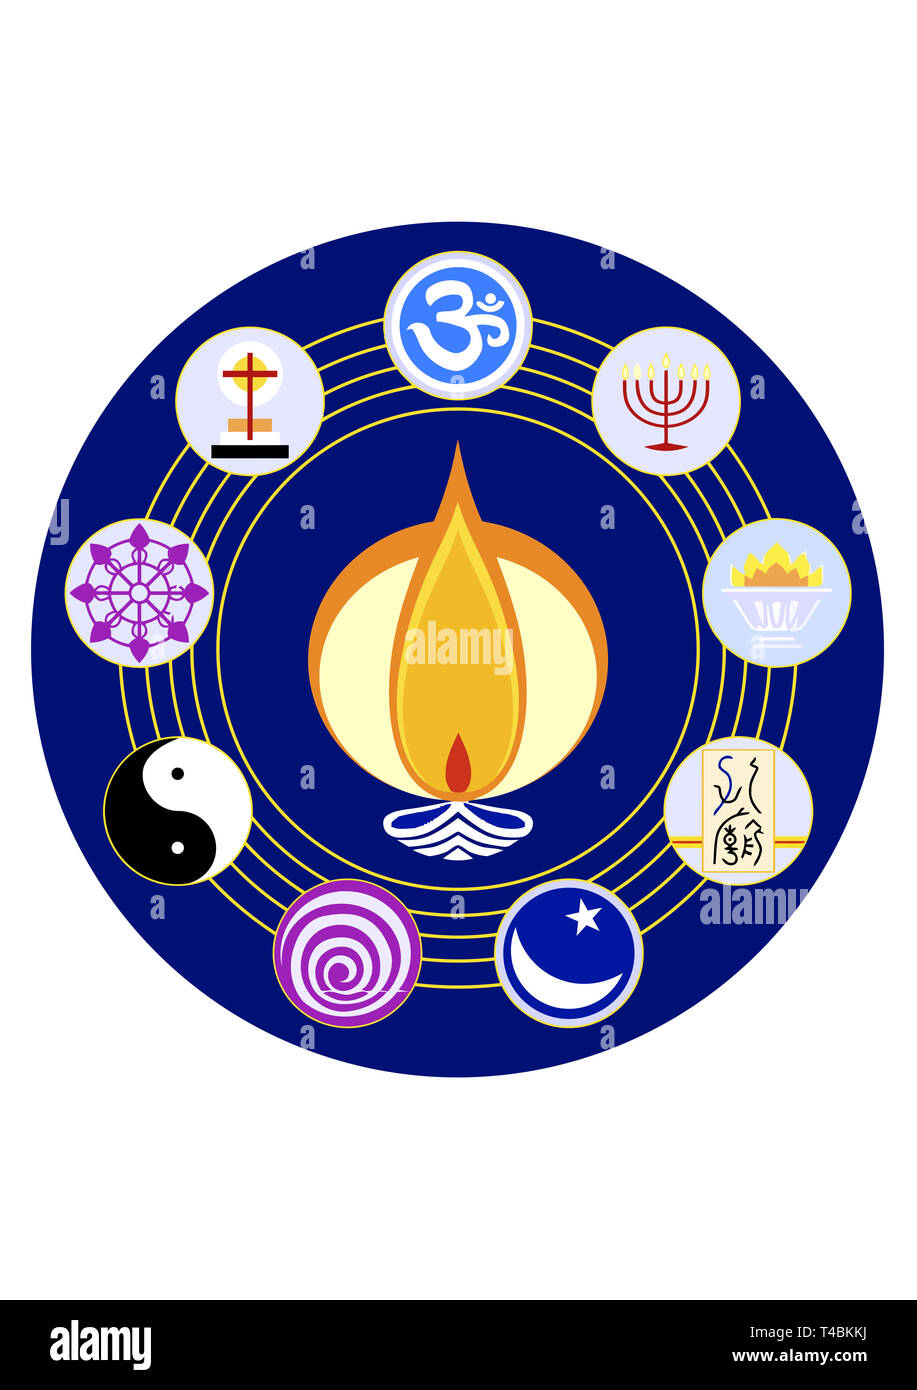 circle principal religions united together to the light illustration Stock Photo